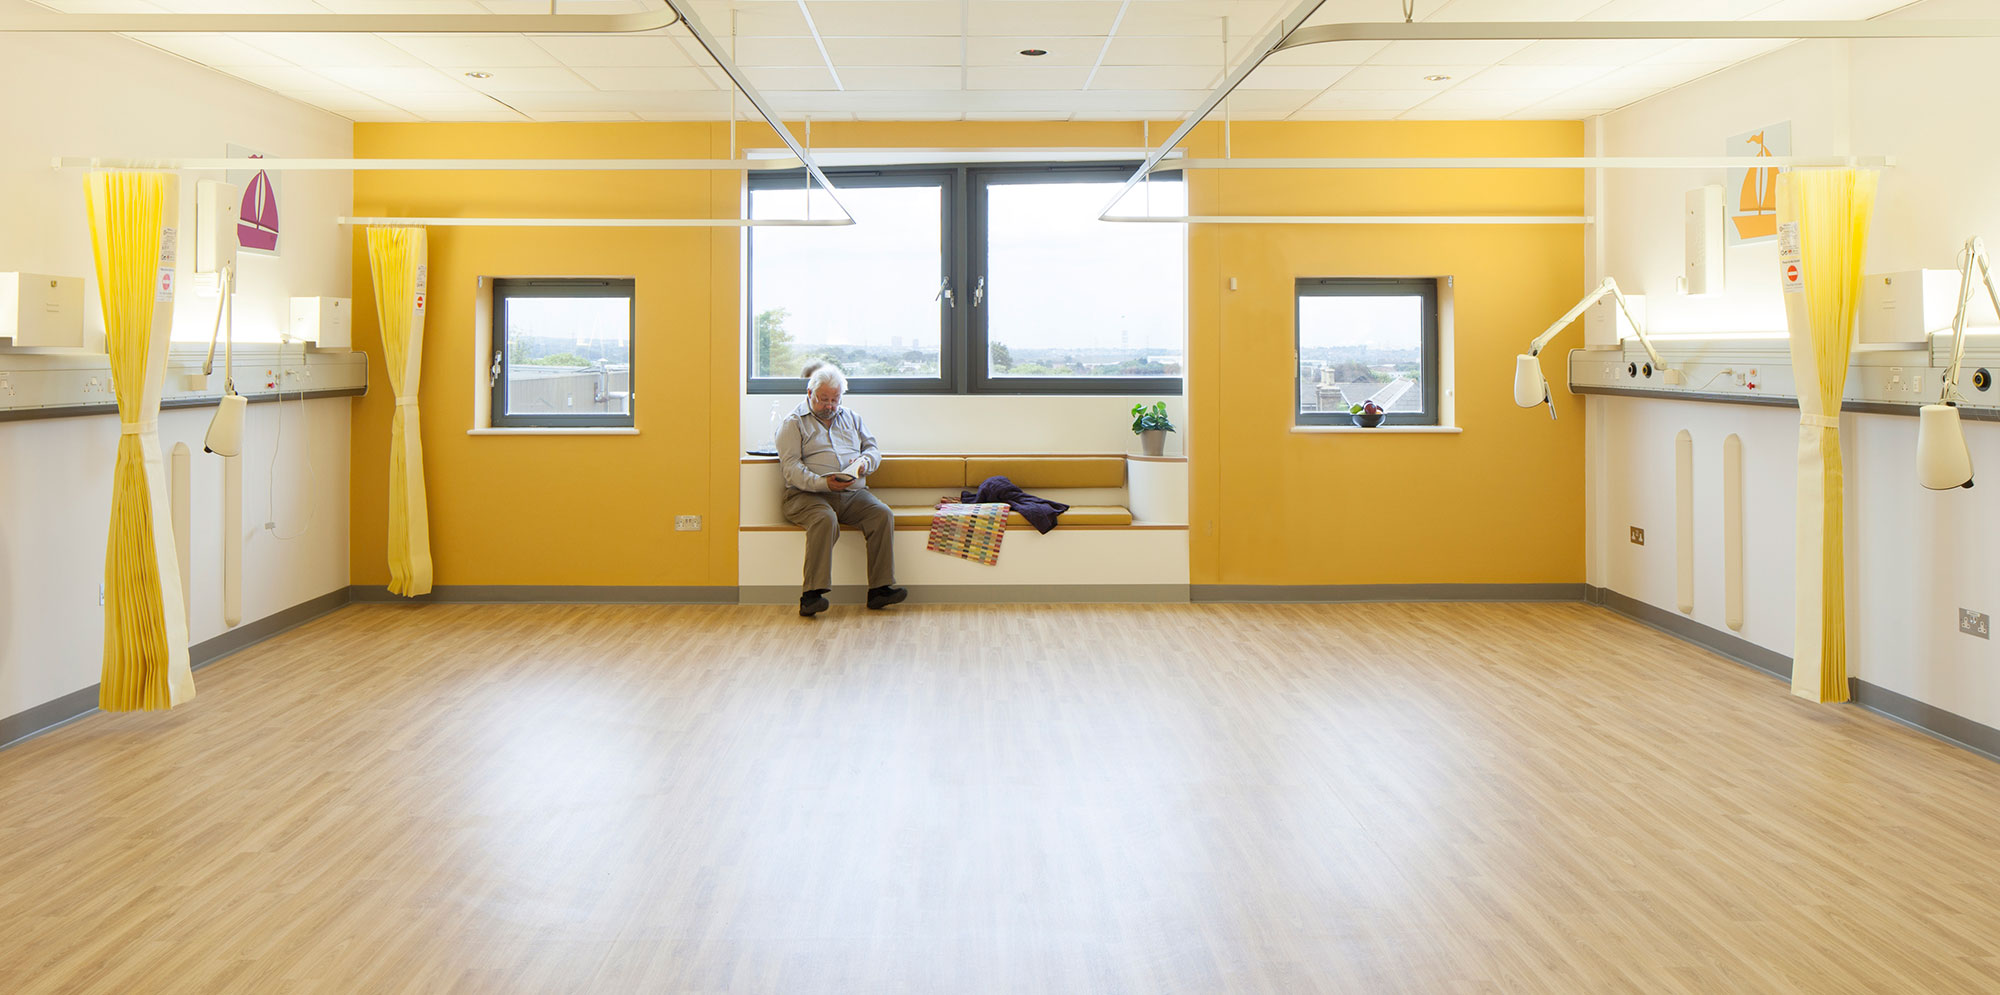 Empty patient room with yellow walls and curtains inside Croydon University hospital